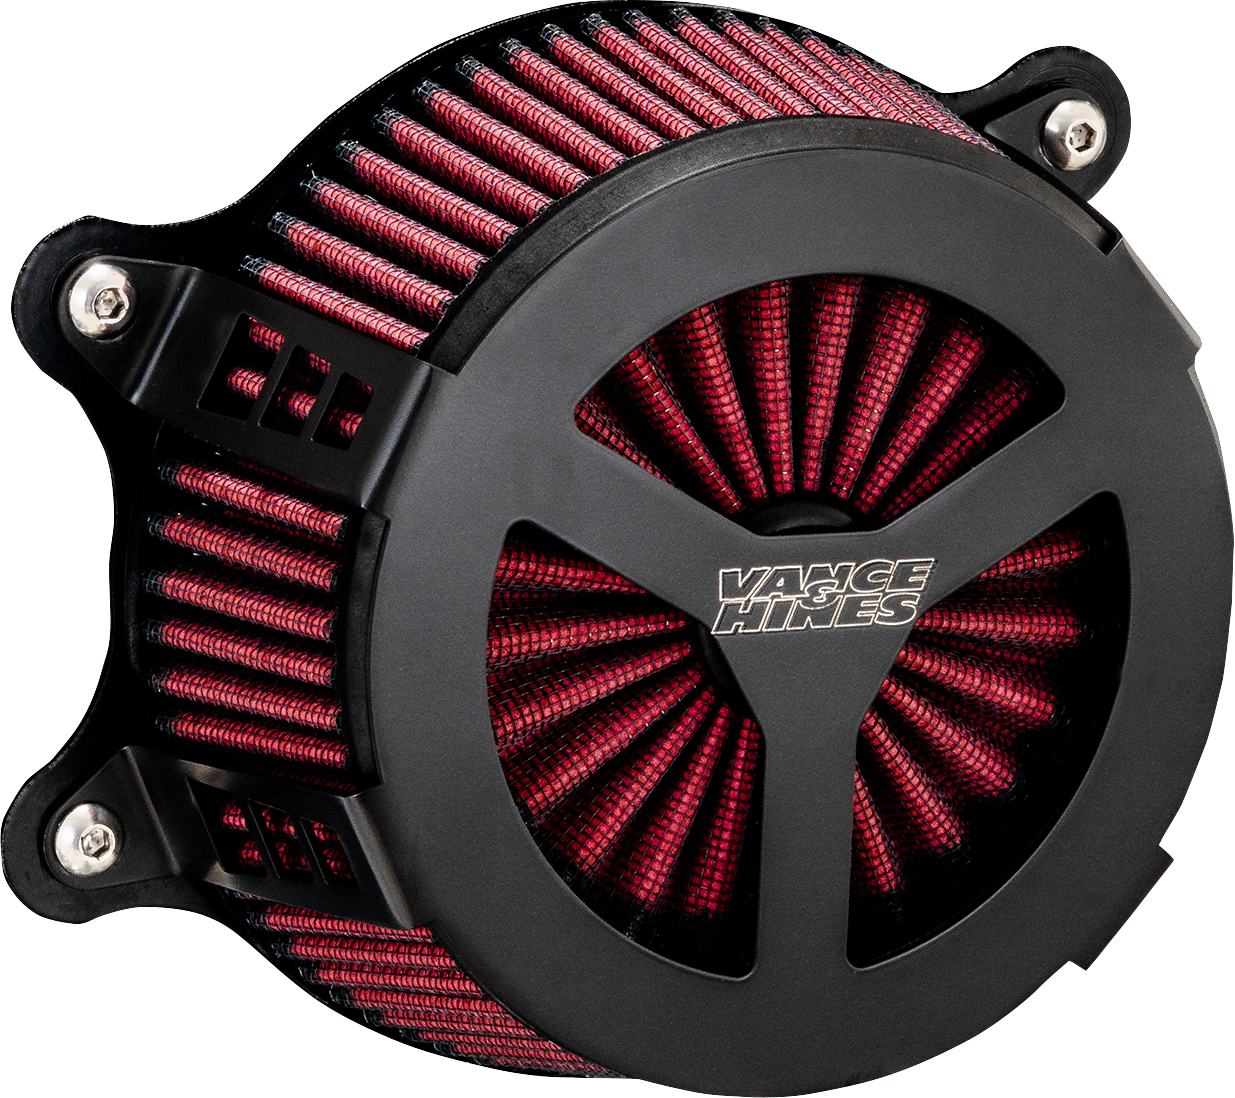 Vance & Hines VO2 Radiant III Air Cleaner 2008-2017 Harley Touring Softail Dyna